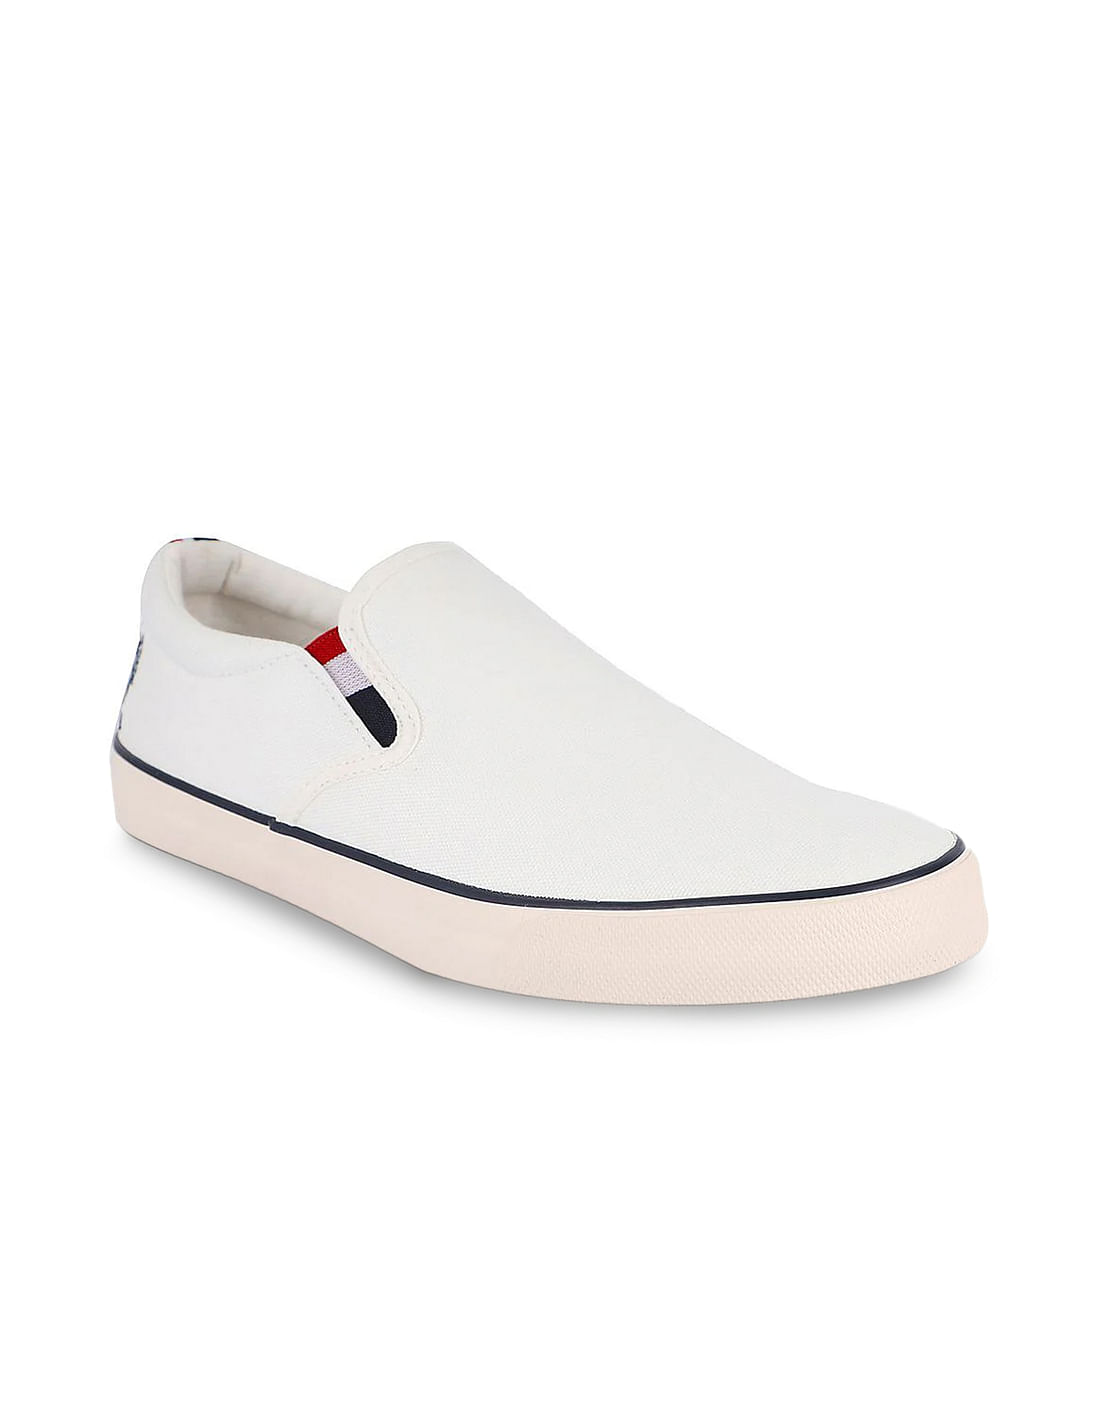 Buy U.S. Polo Assn. Striped Gusset Fitz Slip On Shoes - NNNOW.com